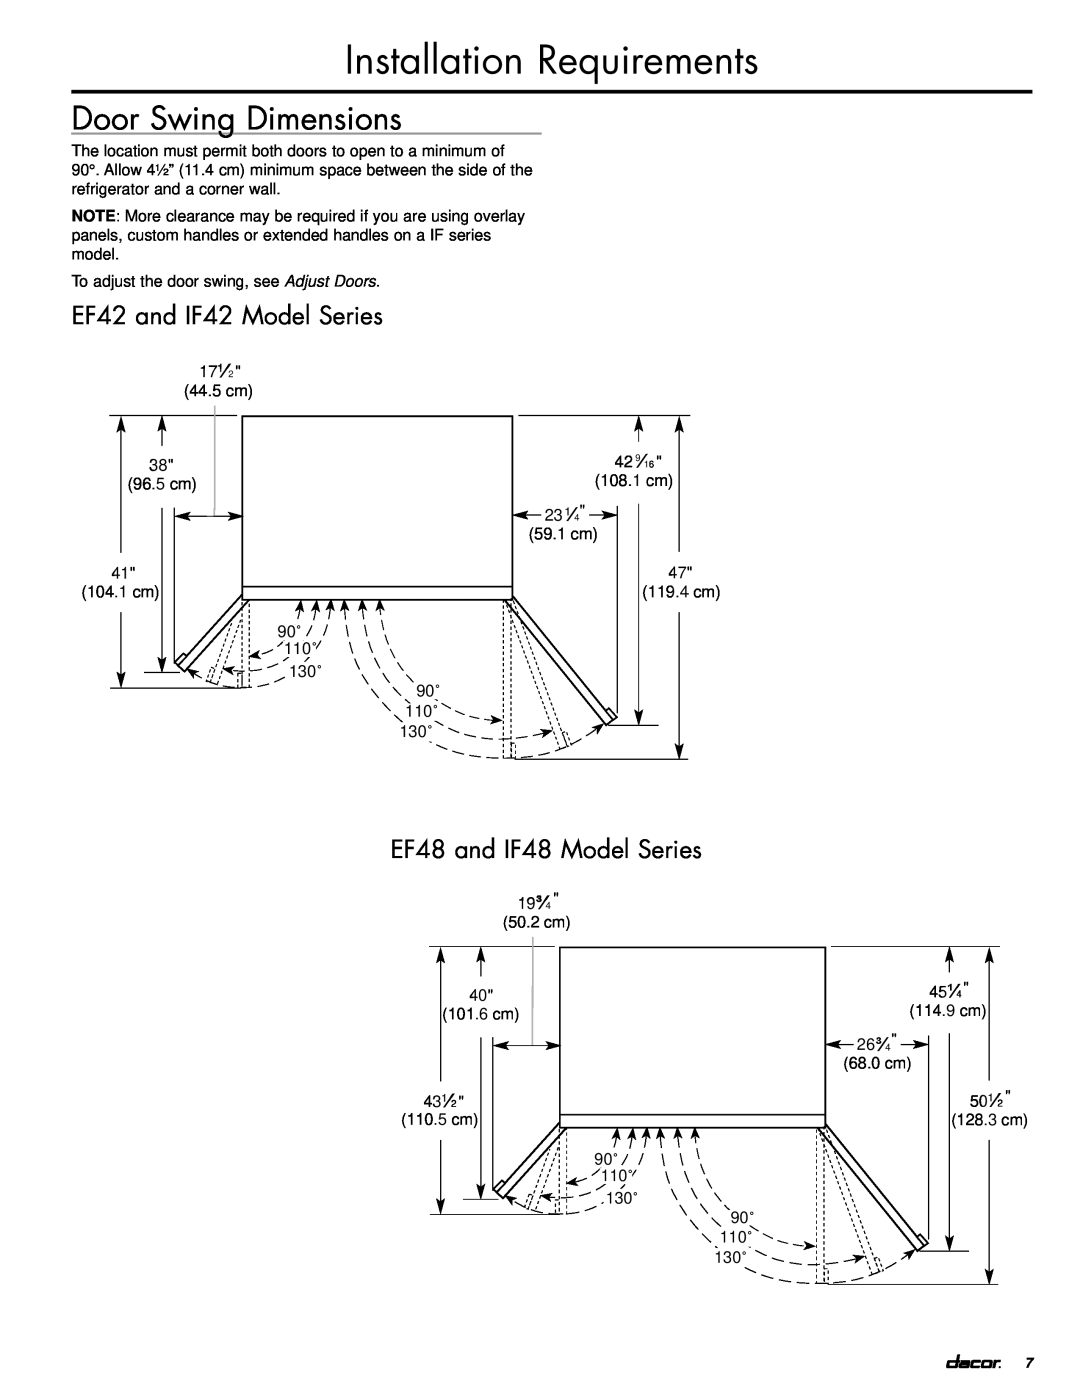 Dacor EF42DBSS Door Swing Dimensions, EF42 and IF42 Model Series, EF48 and IF48 Model Series, Installation Requirements 